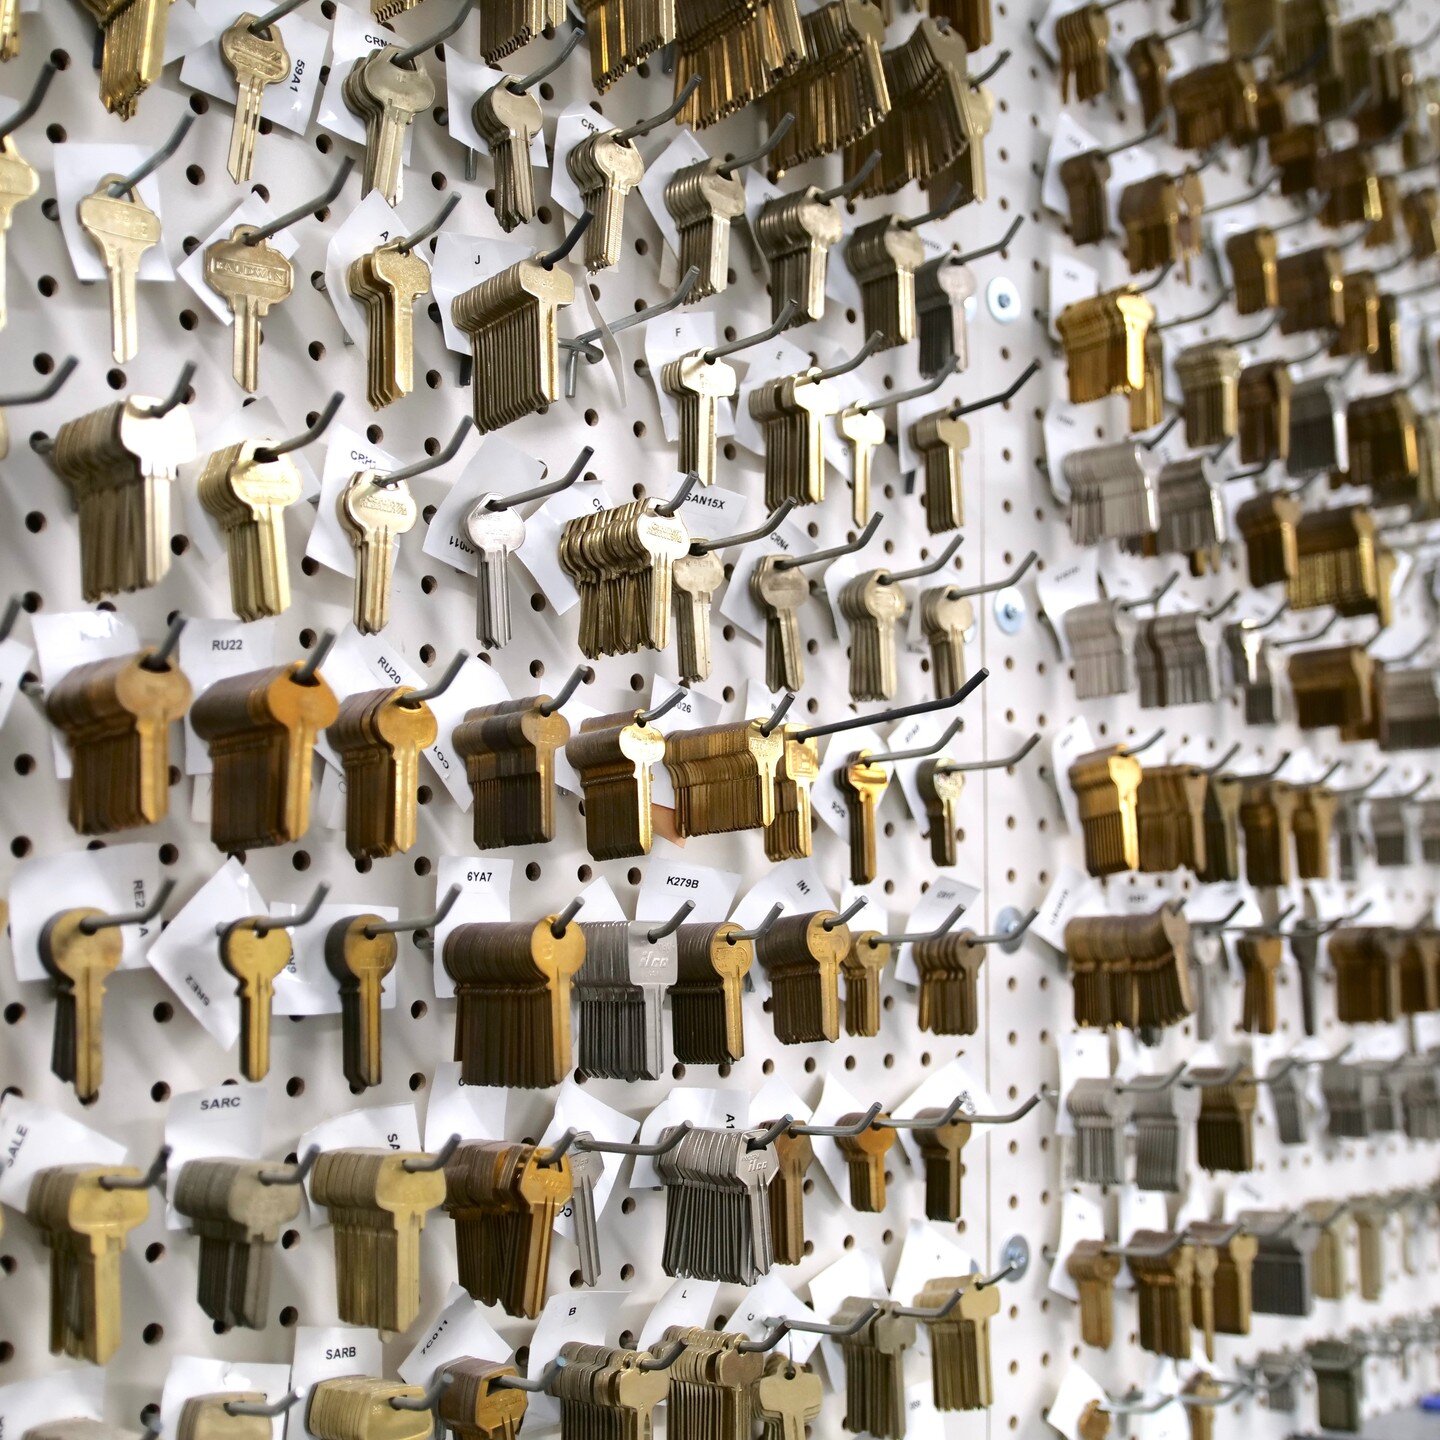 We're here to help with all your locksmith needs. From duplicating keys to emergency lockouts, we've got you covered!